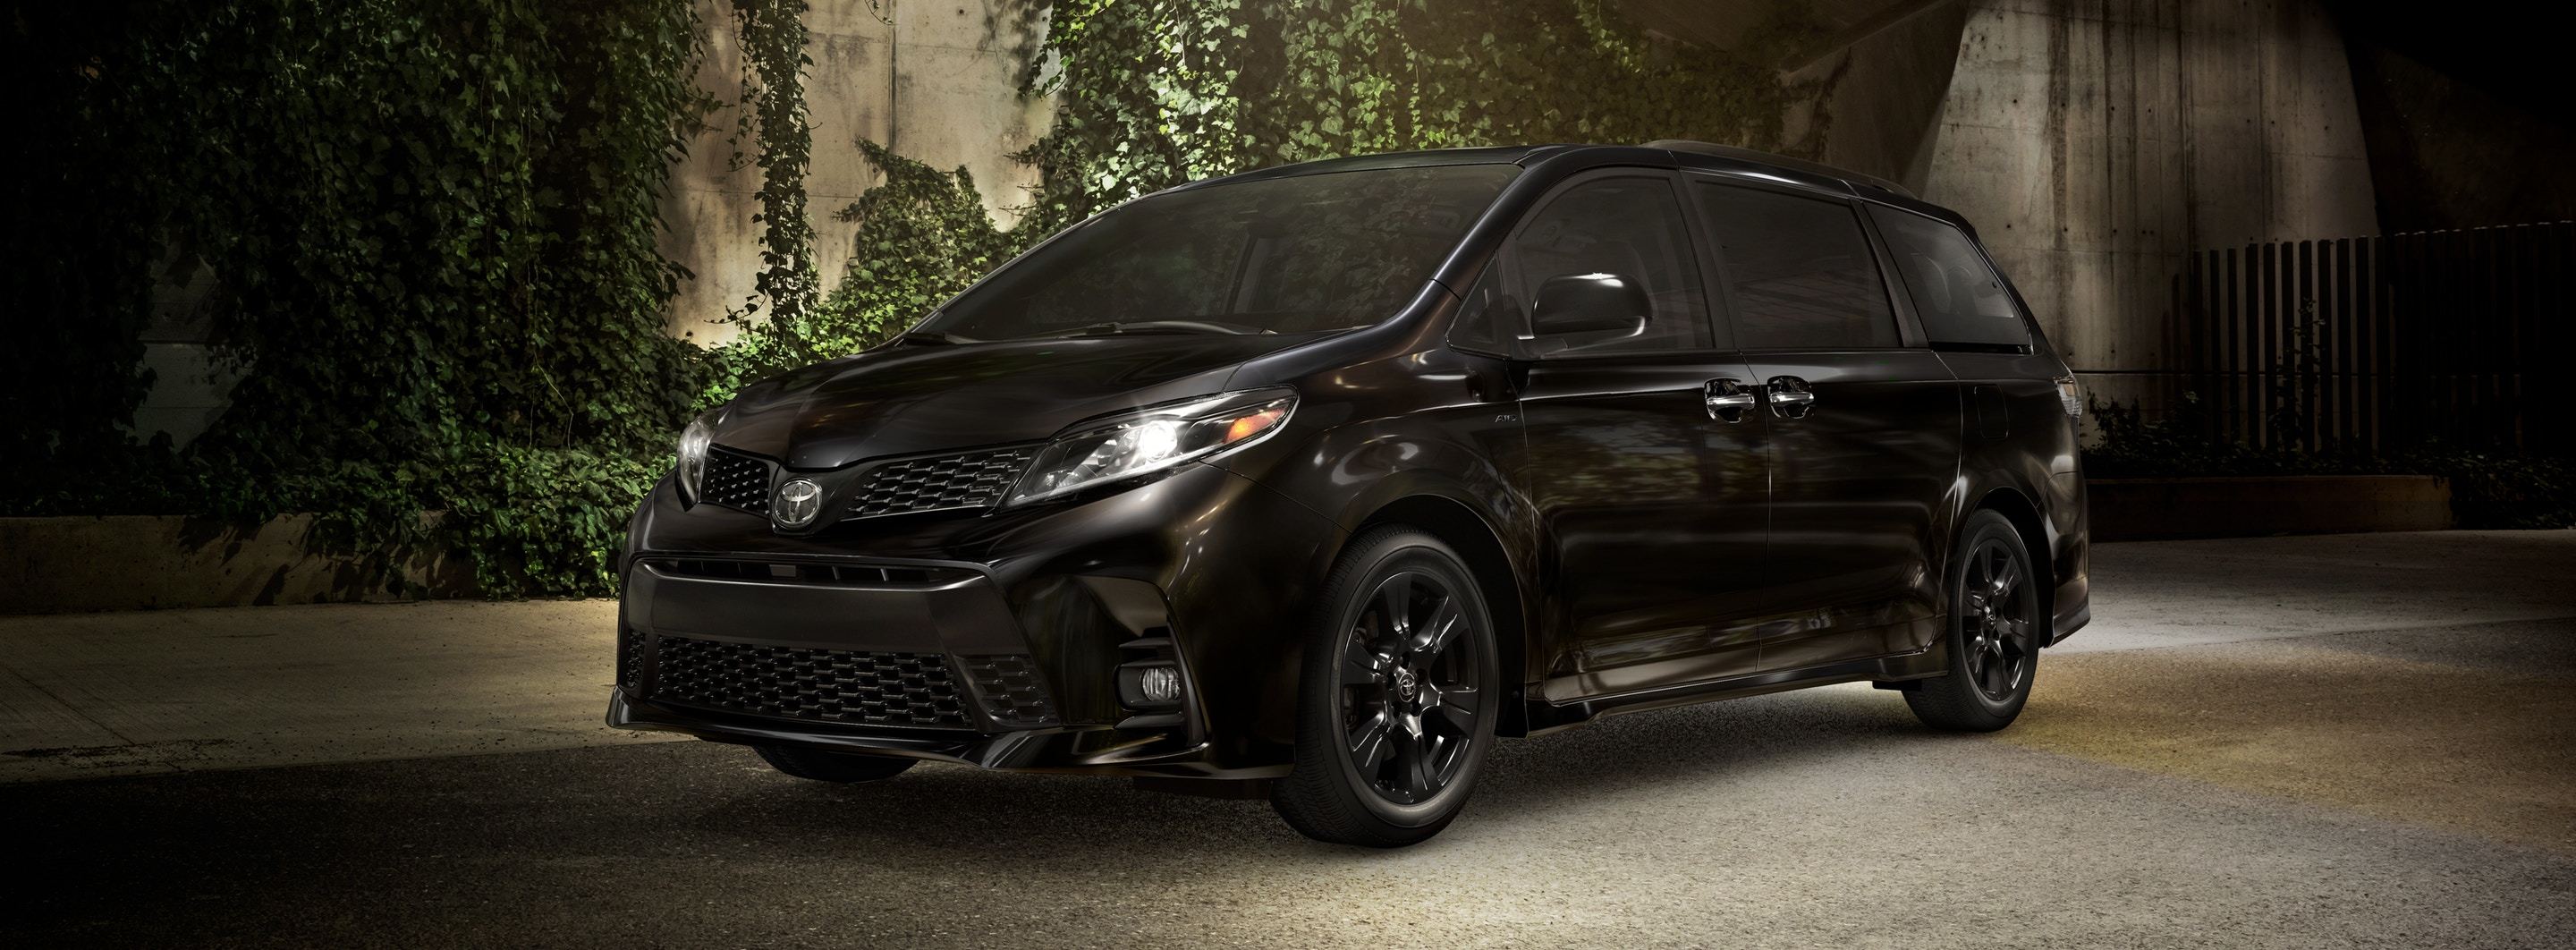 2020 Toyota Sienna For Sale Near Pittsburgh Pa